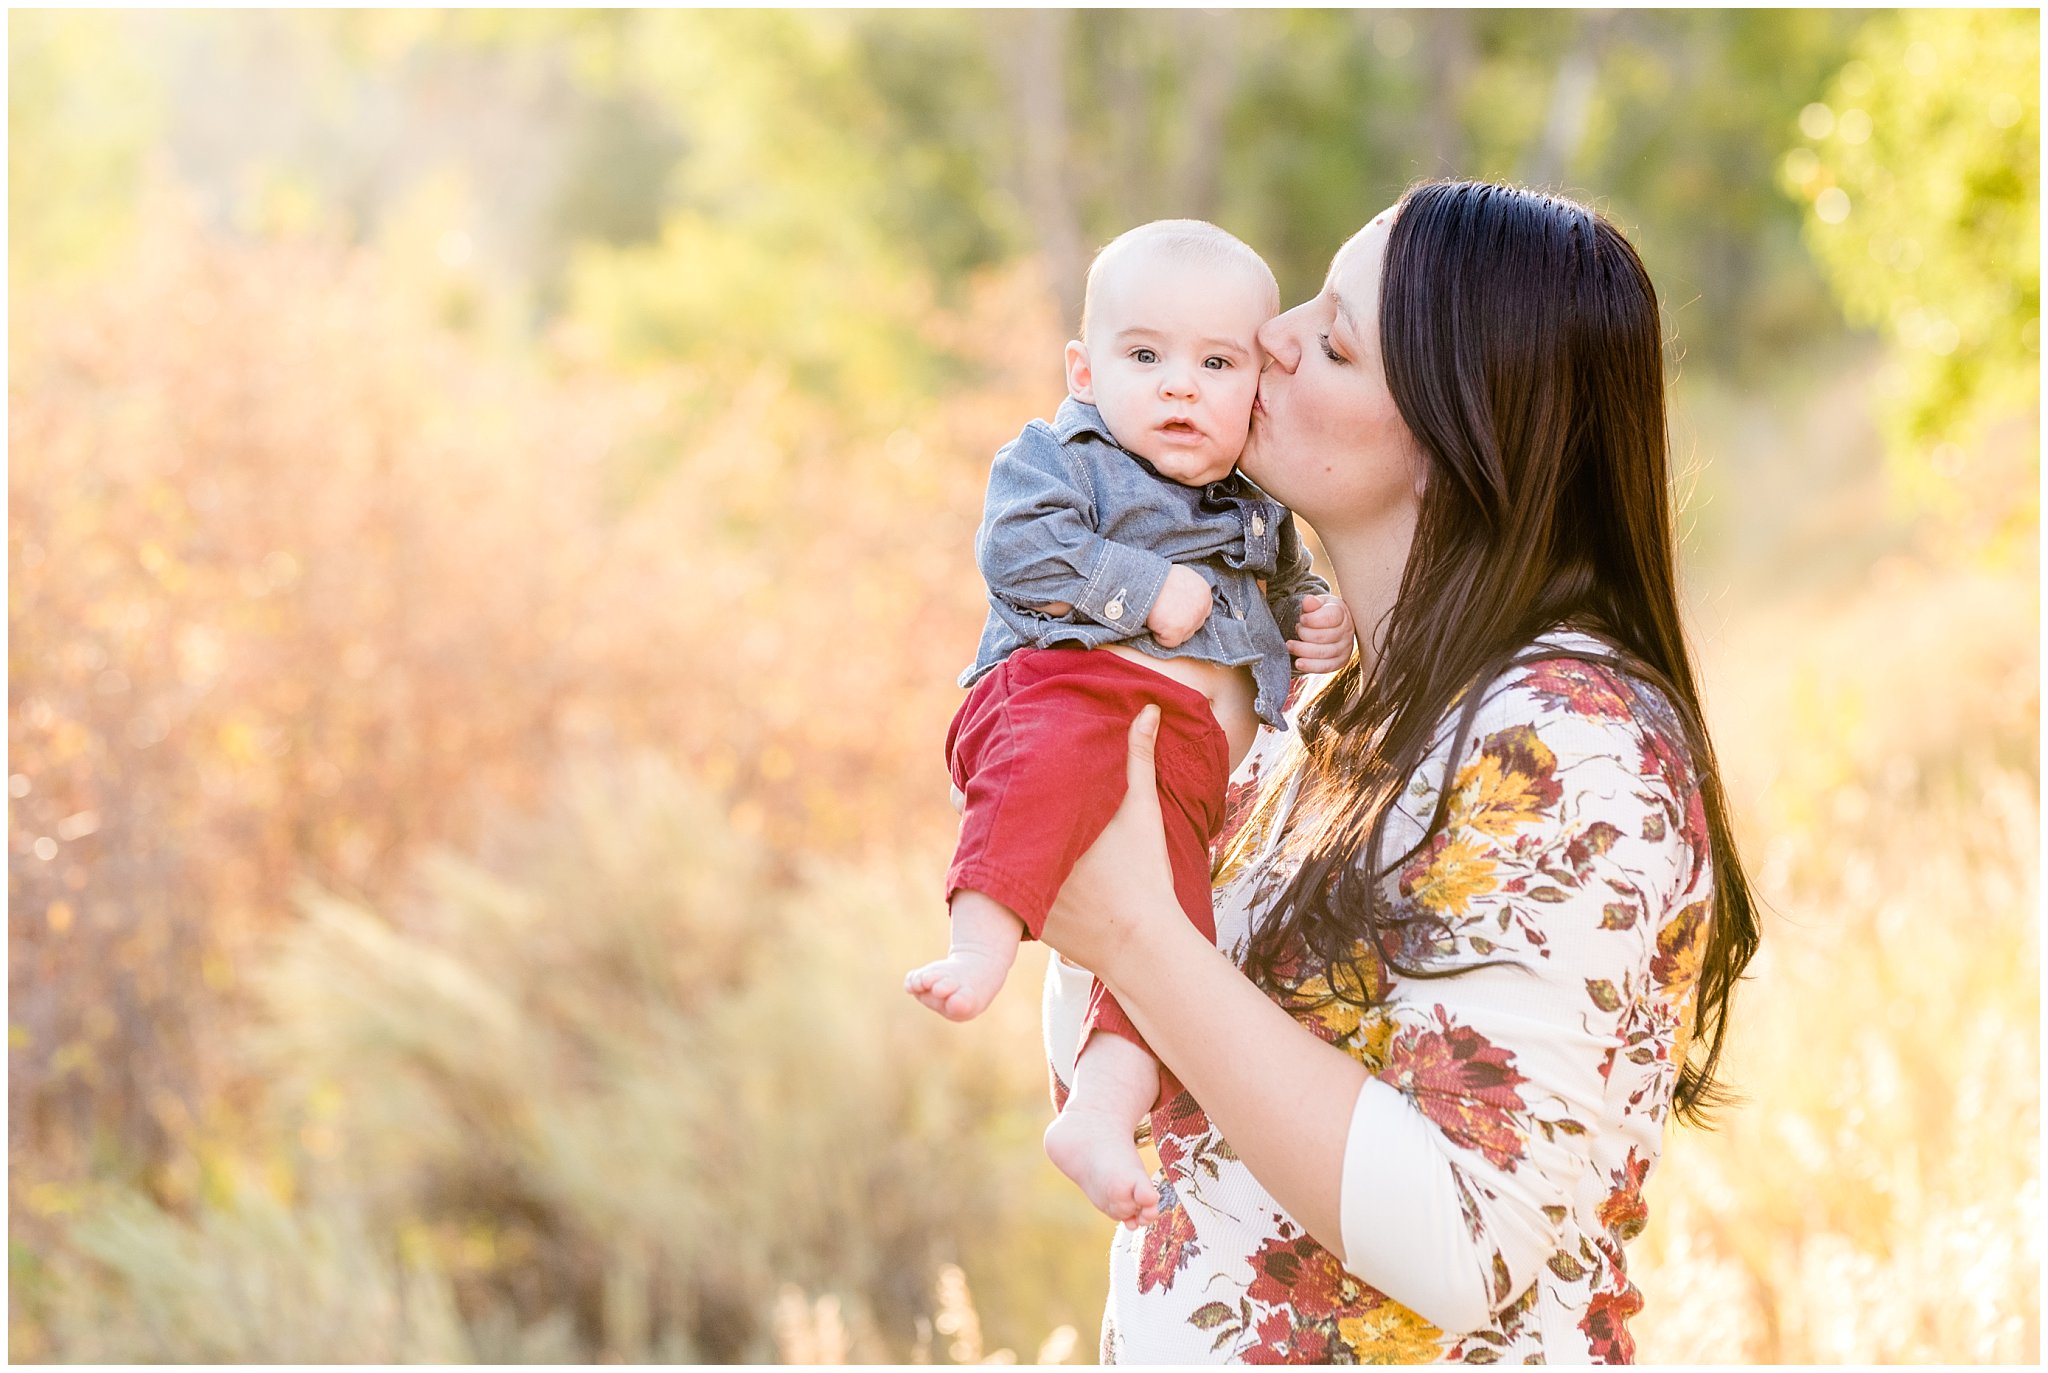 Mom kisses baby on the cheek | Fall Family Pictures at Snowbasin | Jessie and Dallin Photography